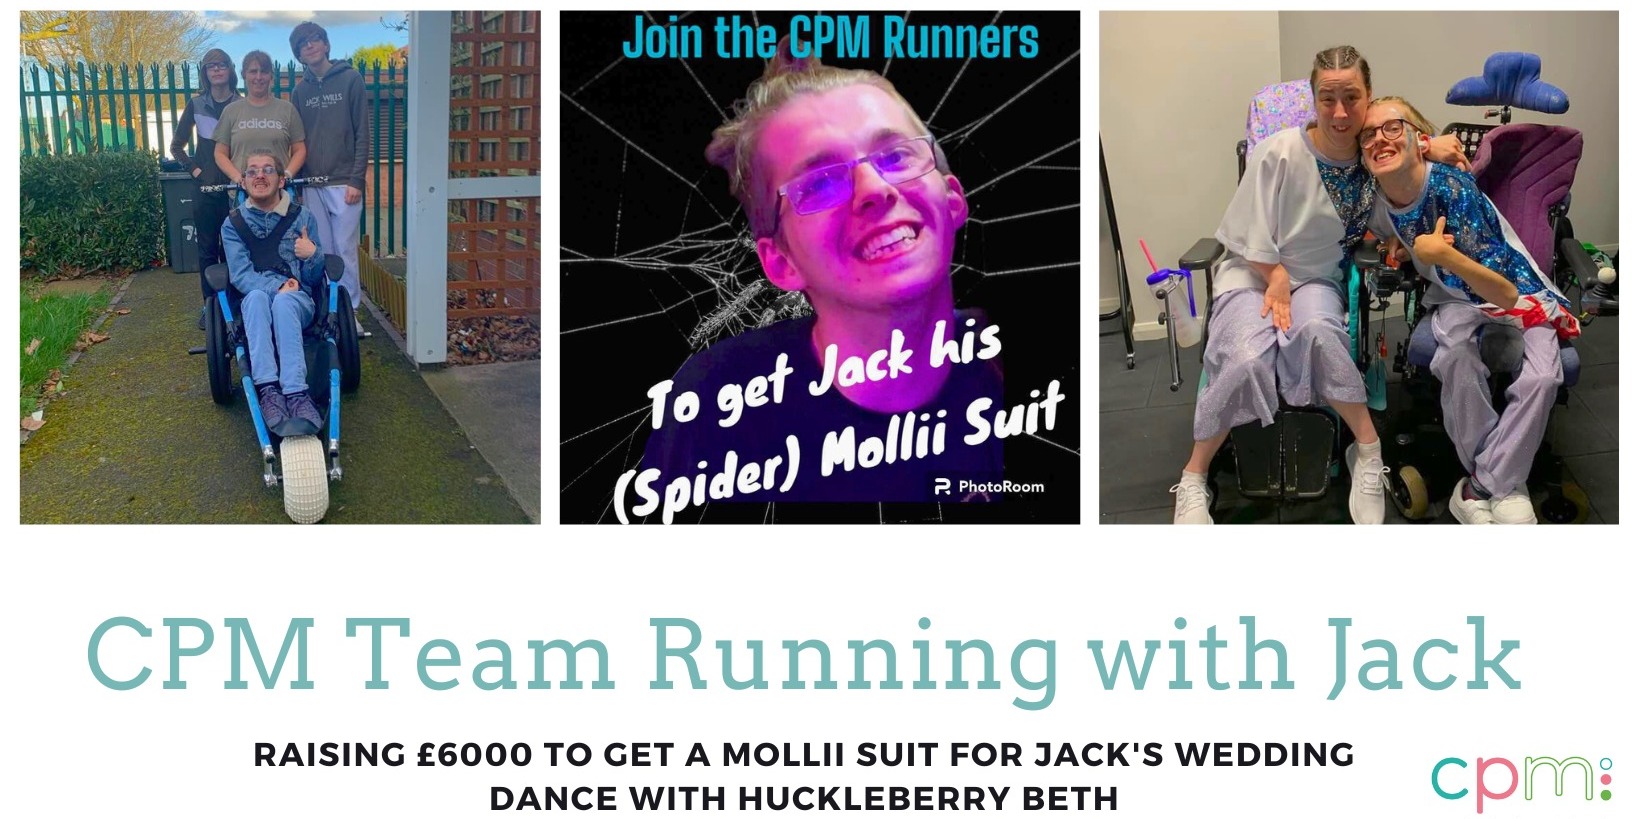 Join the CPM Running Team to help Jack get his (Spider) Mollii Suit